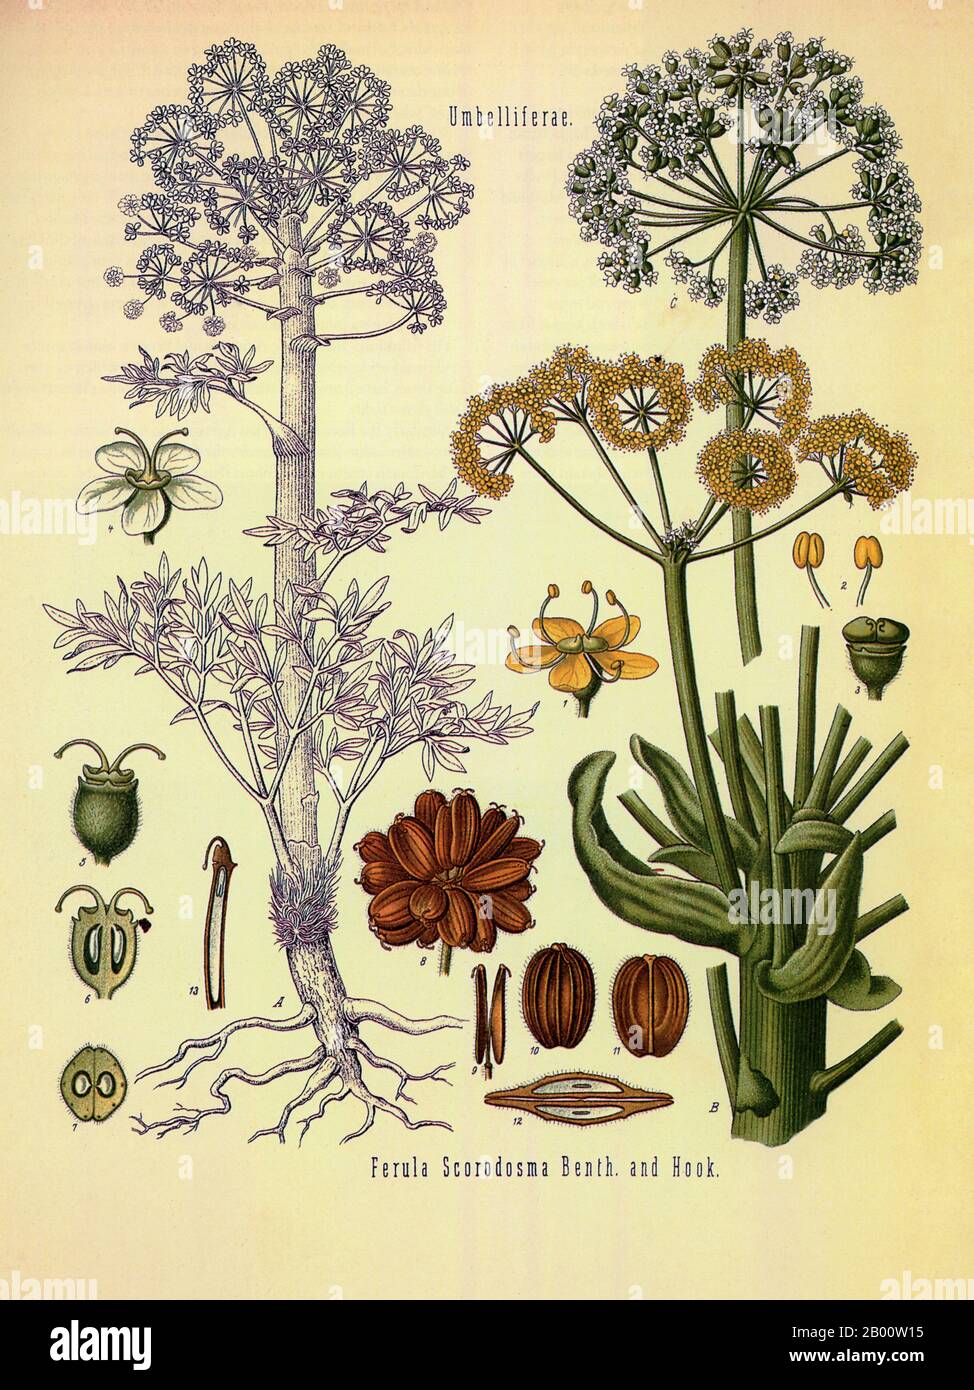 Iran: This illustration shows the flower, stems and roots of the asafoetida plant, species name 'Ferula scorodosma'. Lithograph by Walther Otto Muller (1833-1887), c. 1887.  Native to Persia and Mesopotamia, the asafoetida plant is known for its pungent smell, earning it the nickname 'The Devil's Dung' or 'Stinking Gum'. It is often sold in powdered form as a spice or a condiment in Asian markets, and is often taken as a digestive aid to reduce flatulence. Stock Photo